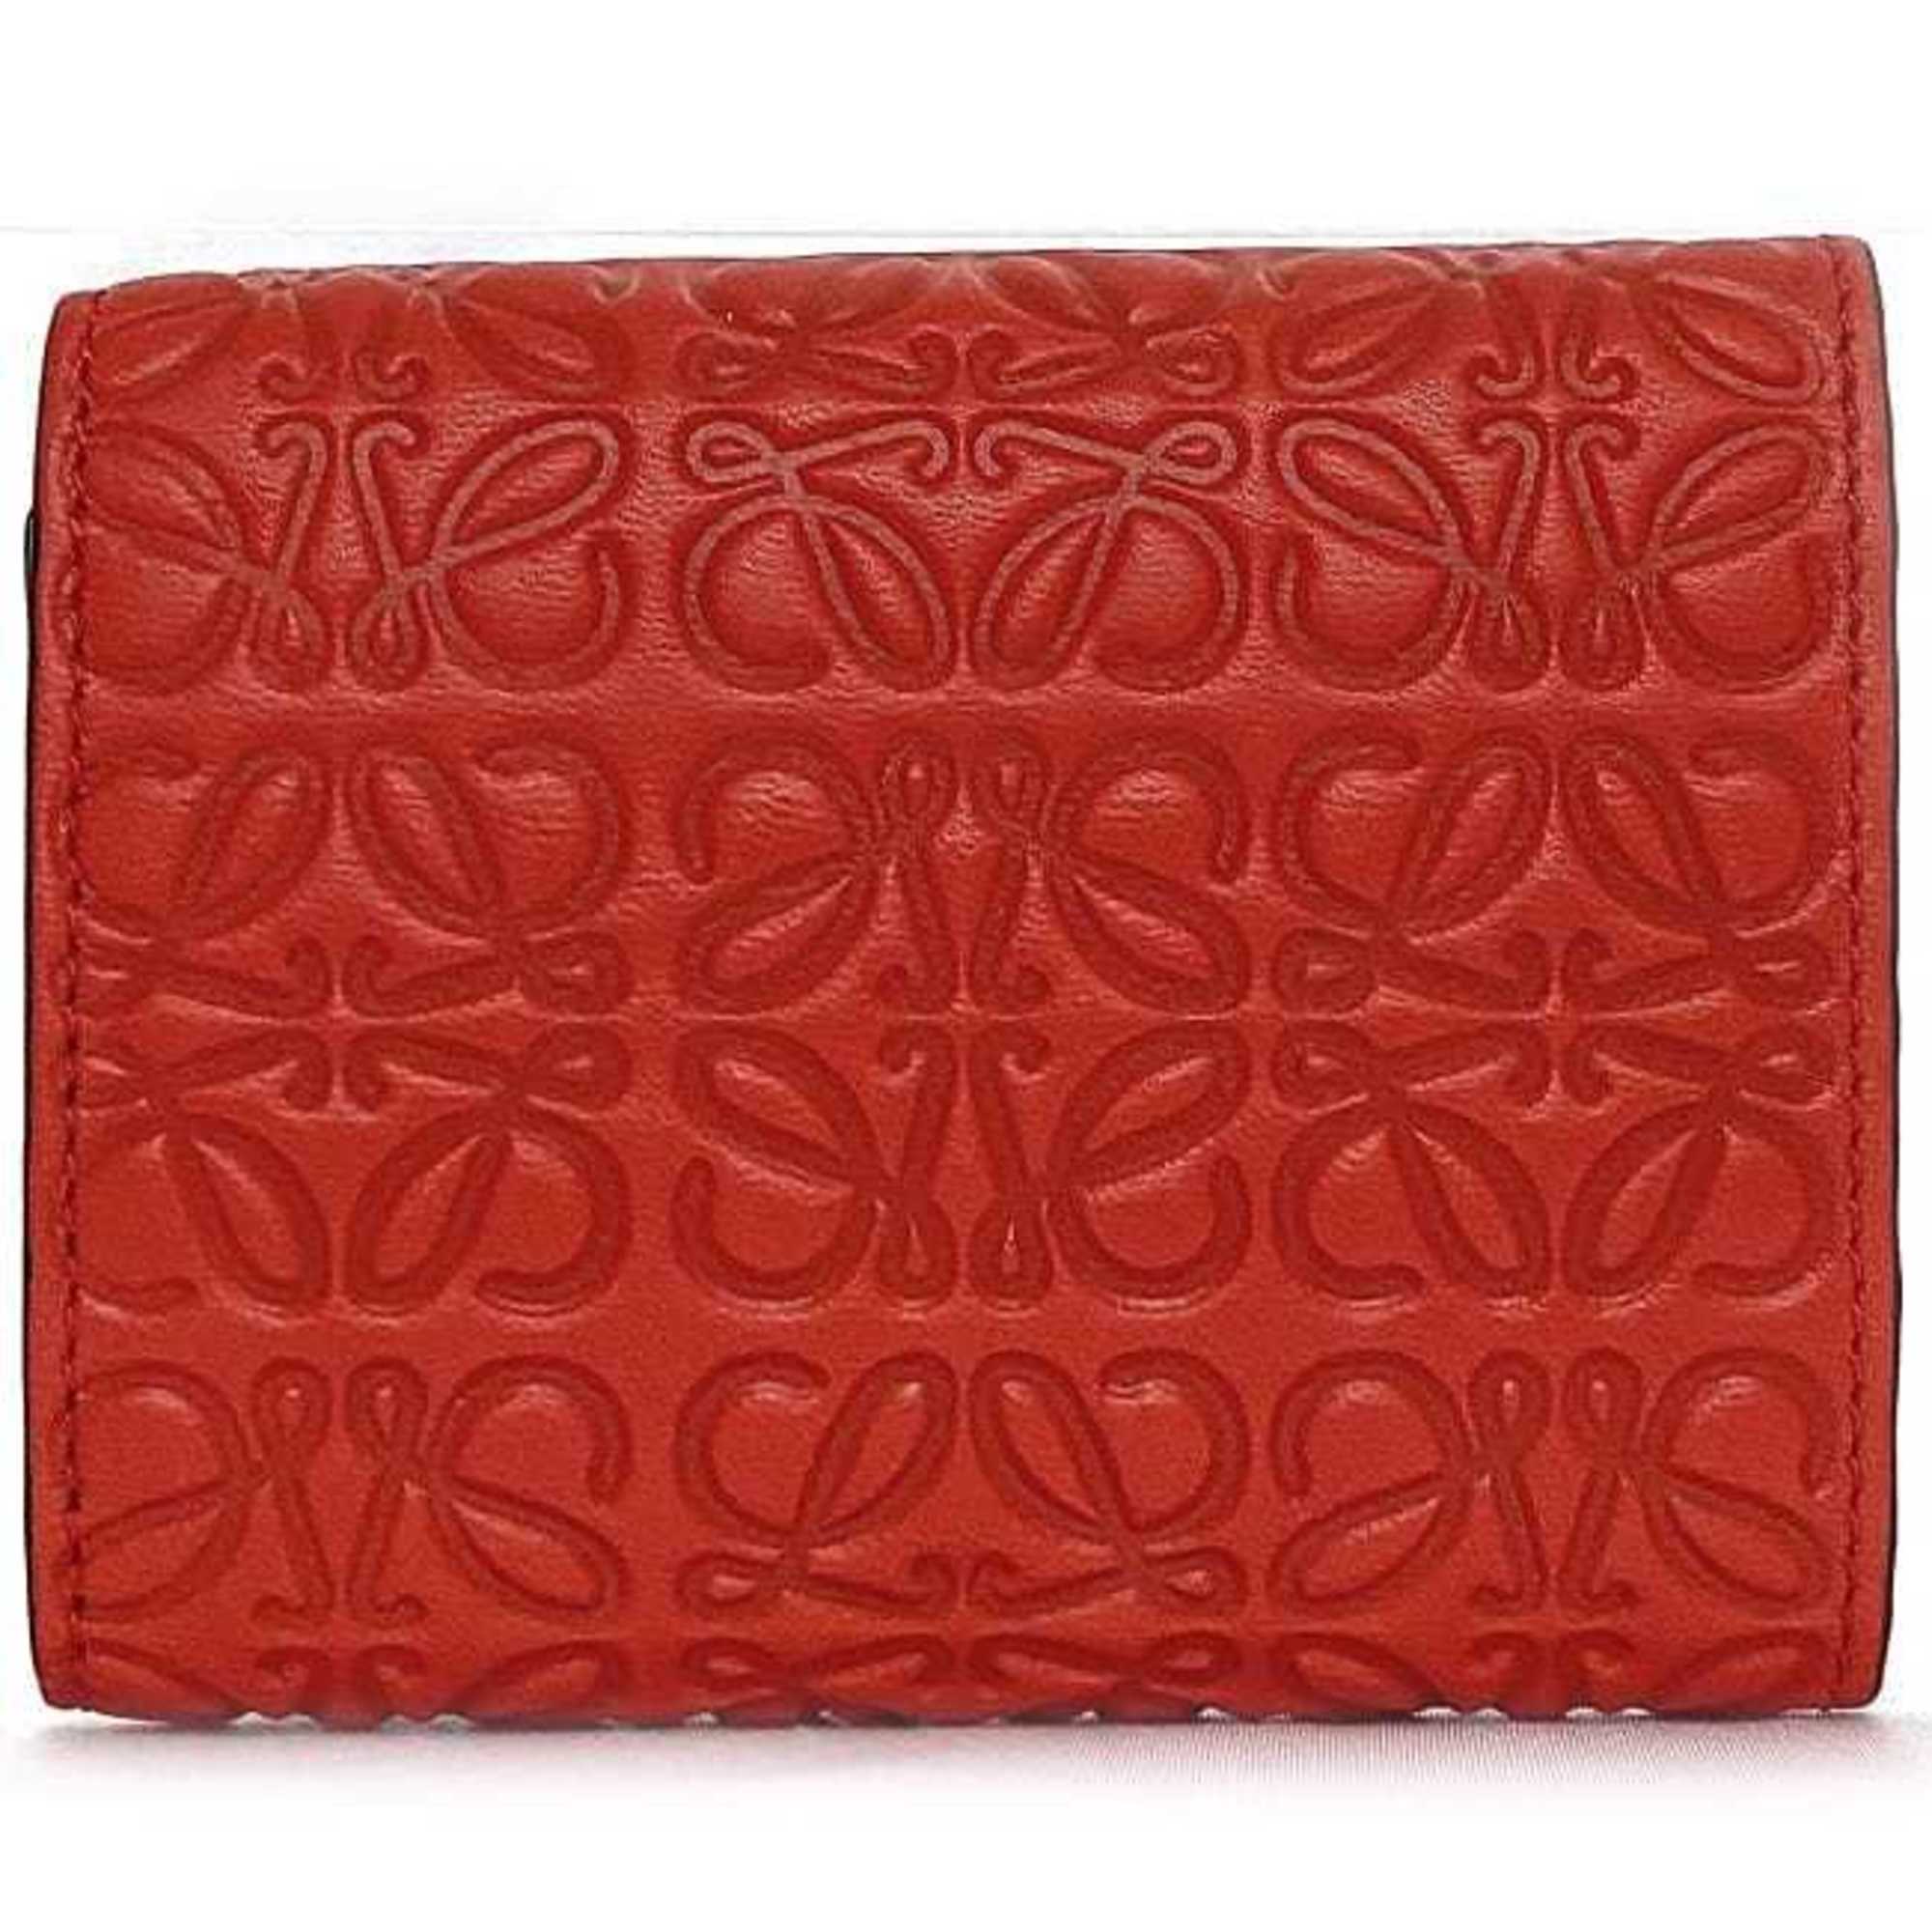 LOEWE Tri-fold Wallet Red Anagram 107.55.S26 f-20474 Leather Compact Vivid Women's